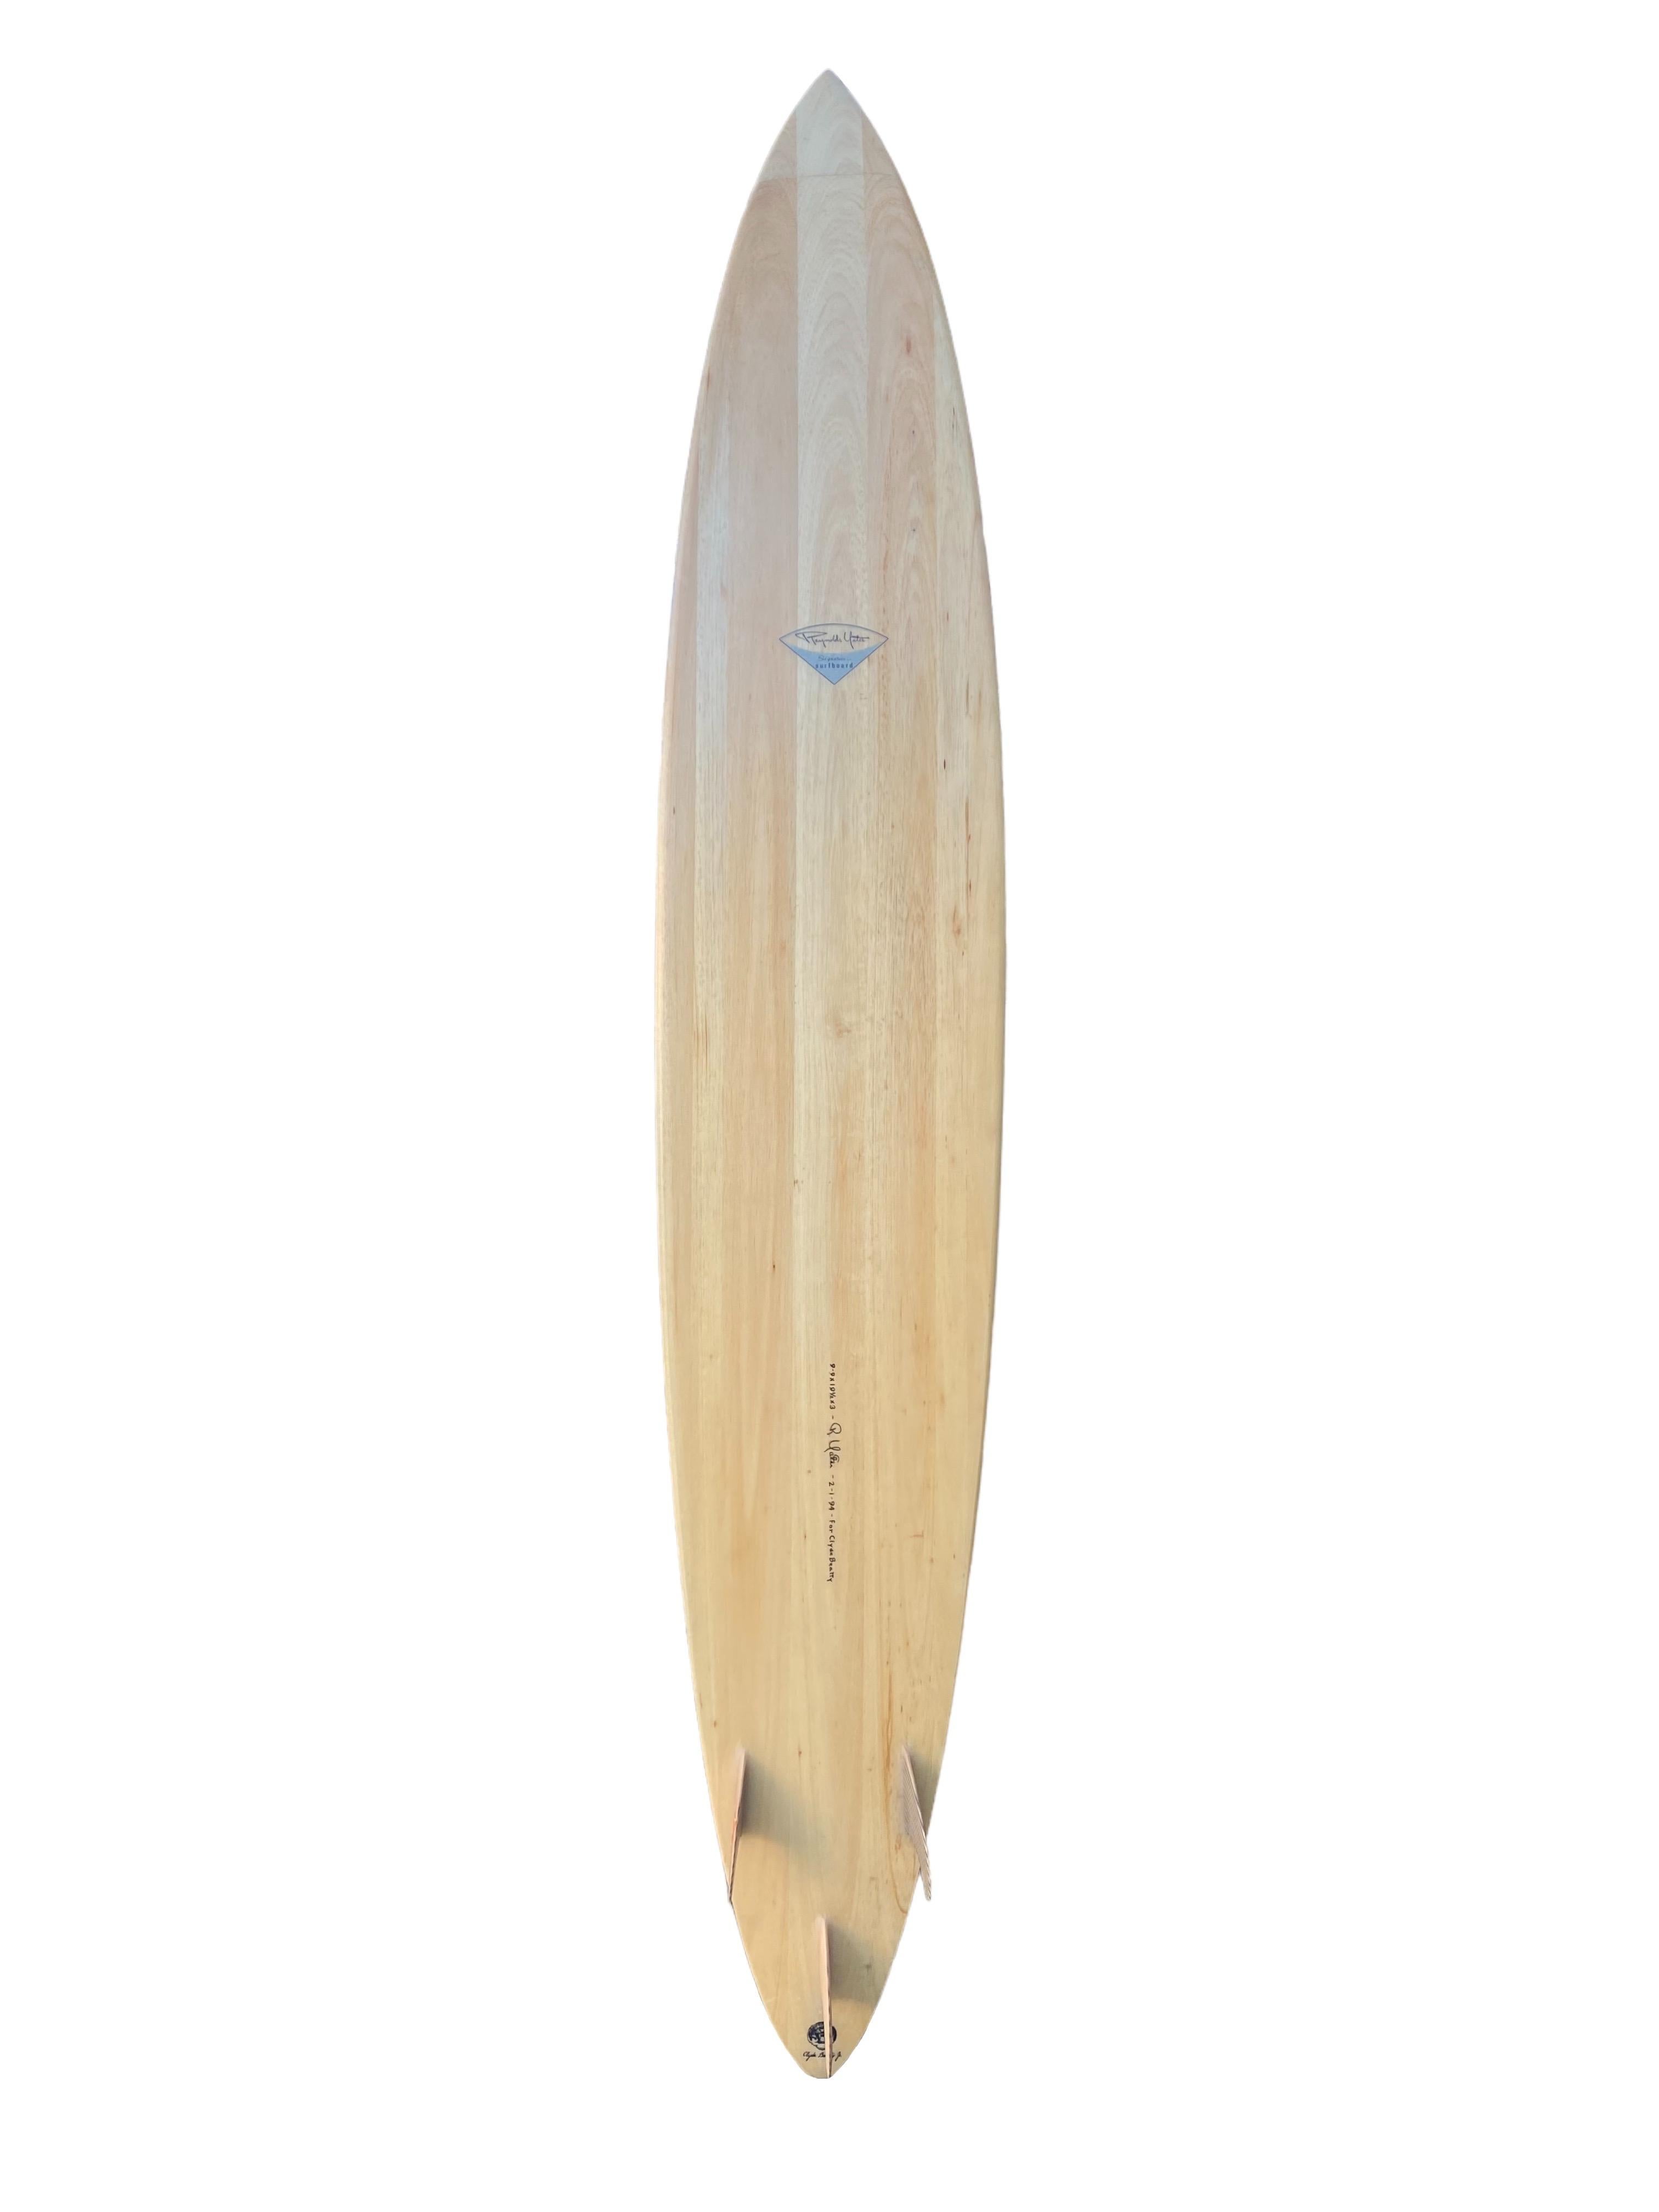 1990s Vintage Clyde Beatty Jr. Personal balsawood surfboard. Shaped by Reynolds Yater. Features a big wave shape design with wooden/carbon trimmed thruster (tri-fin) setup. Made for Clyde Beatty Jr. a 1970s pro surfer/shaper and team rider for Hobie